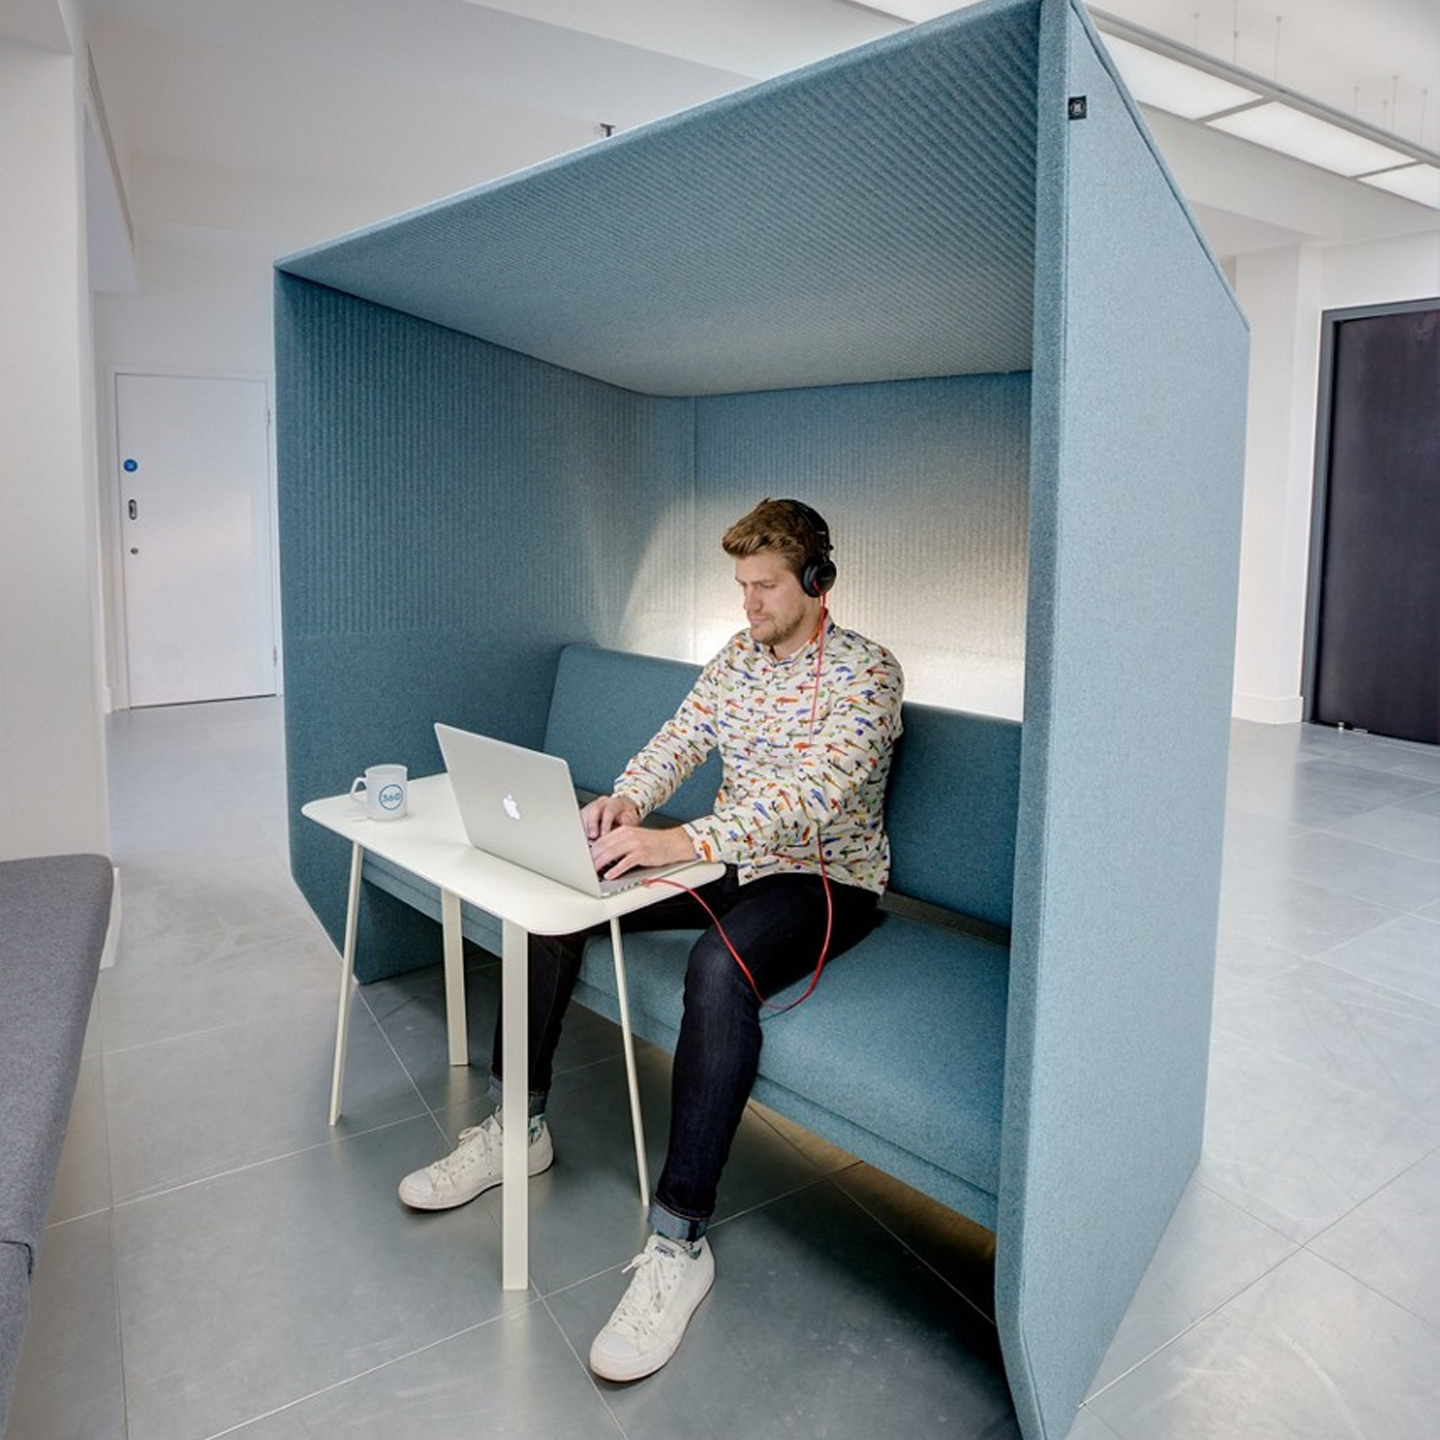 Haworth BuzziHub Booth in blue color with employee working in an open office space